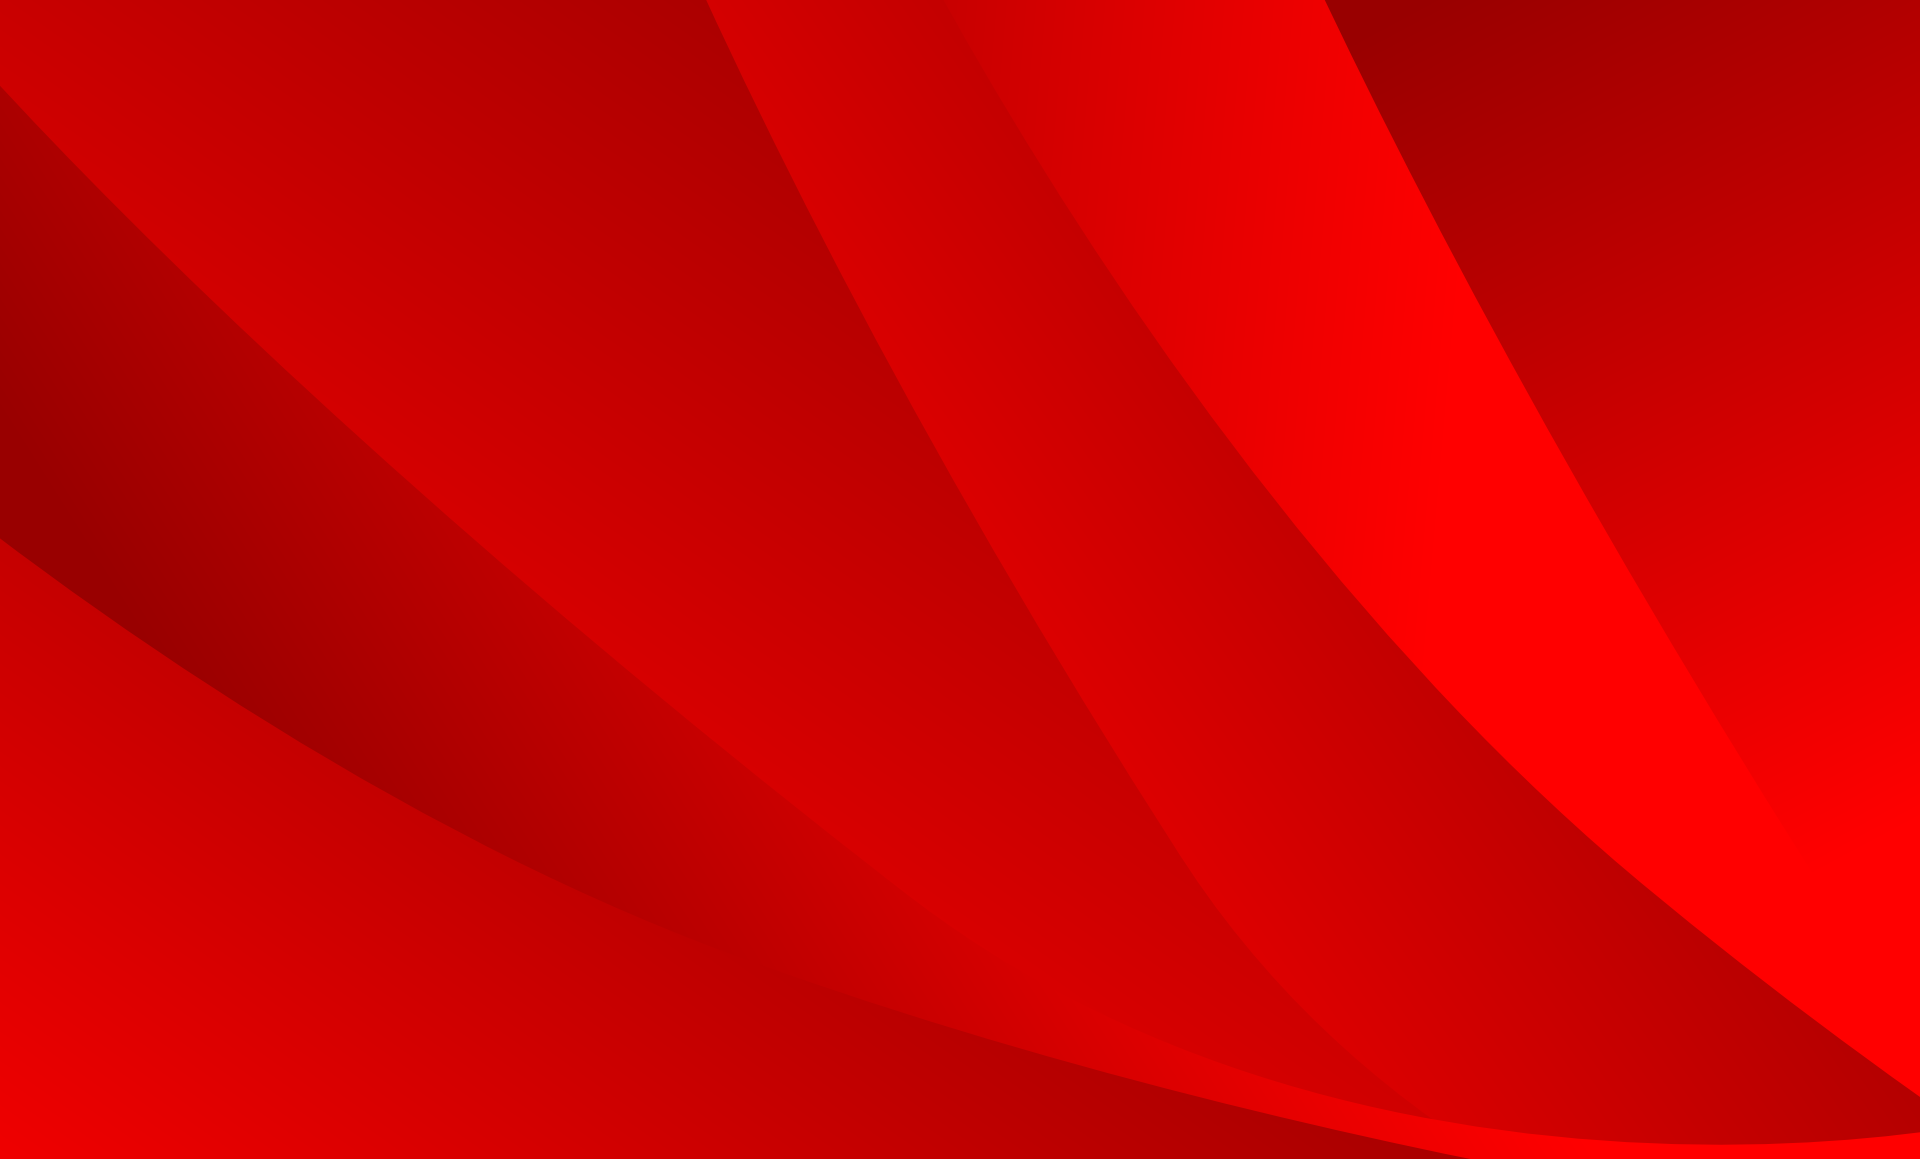 Background with red waves free image